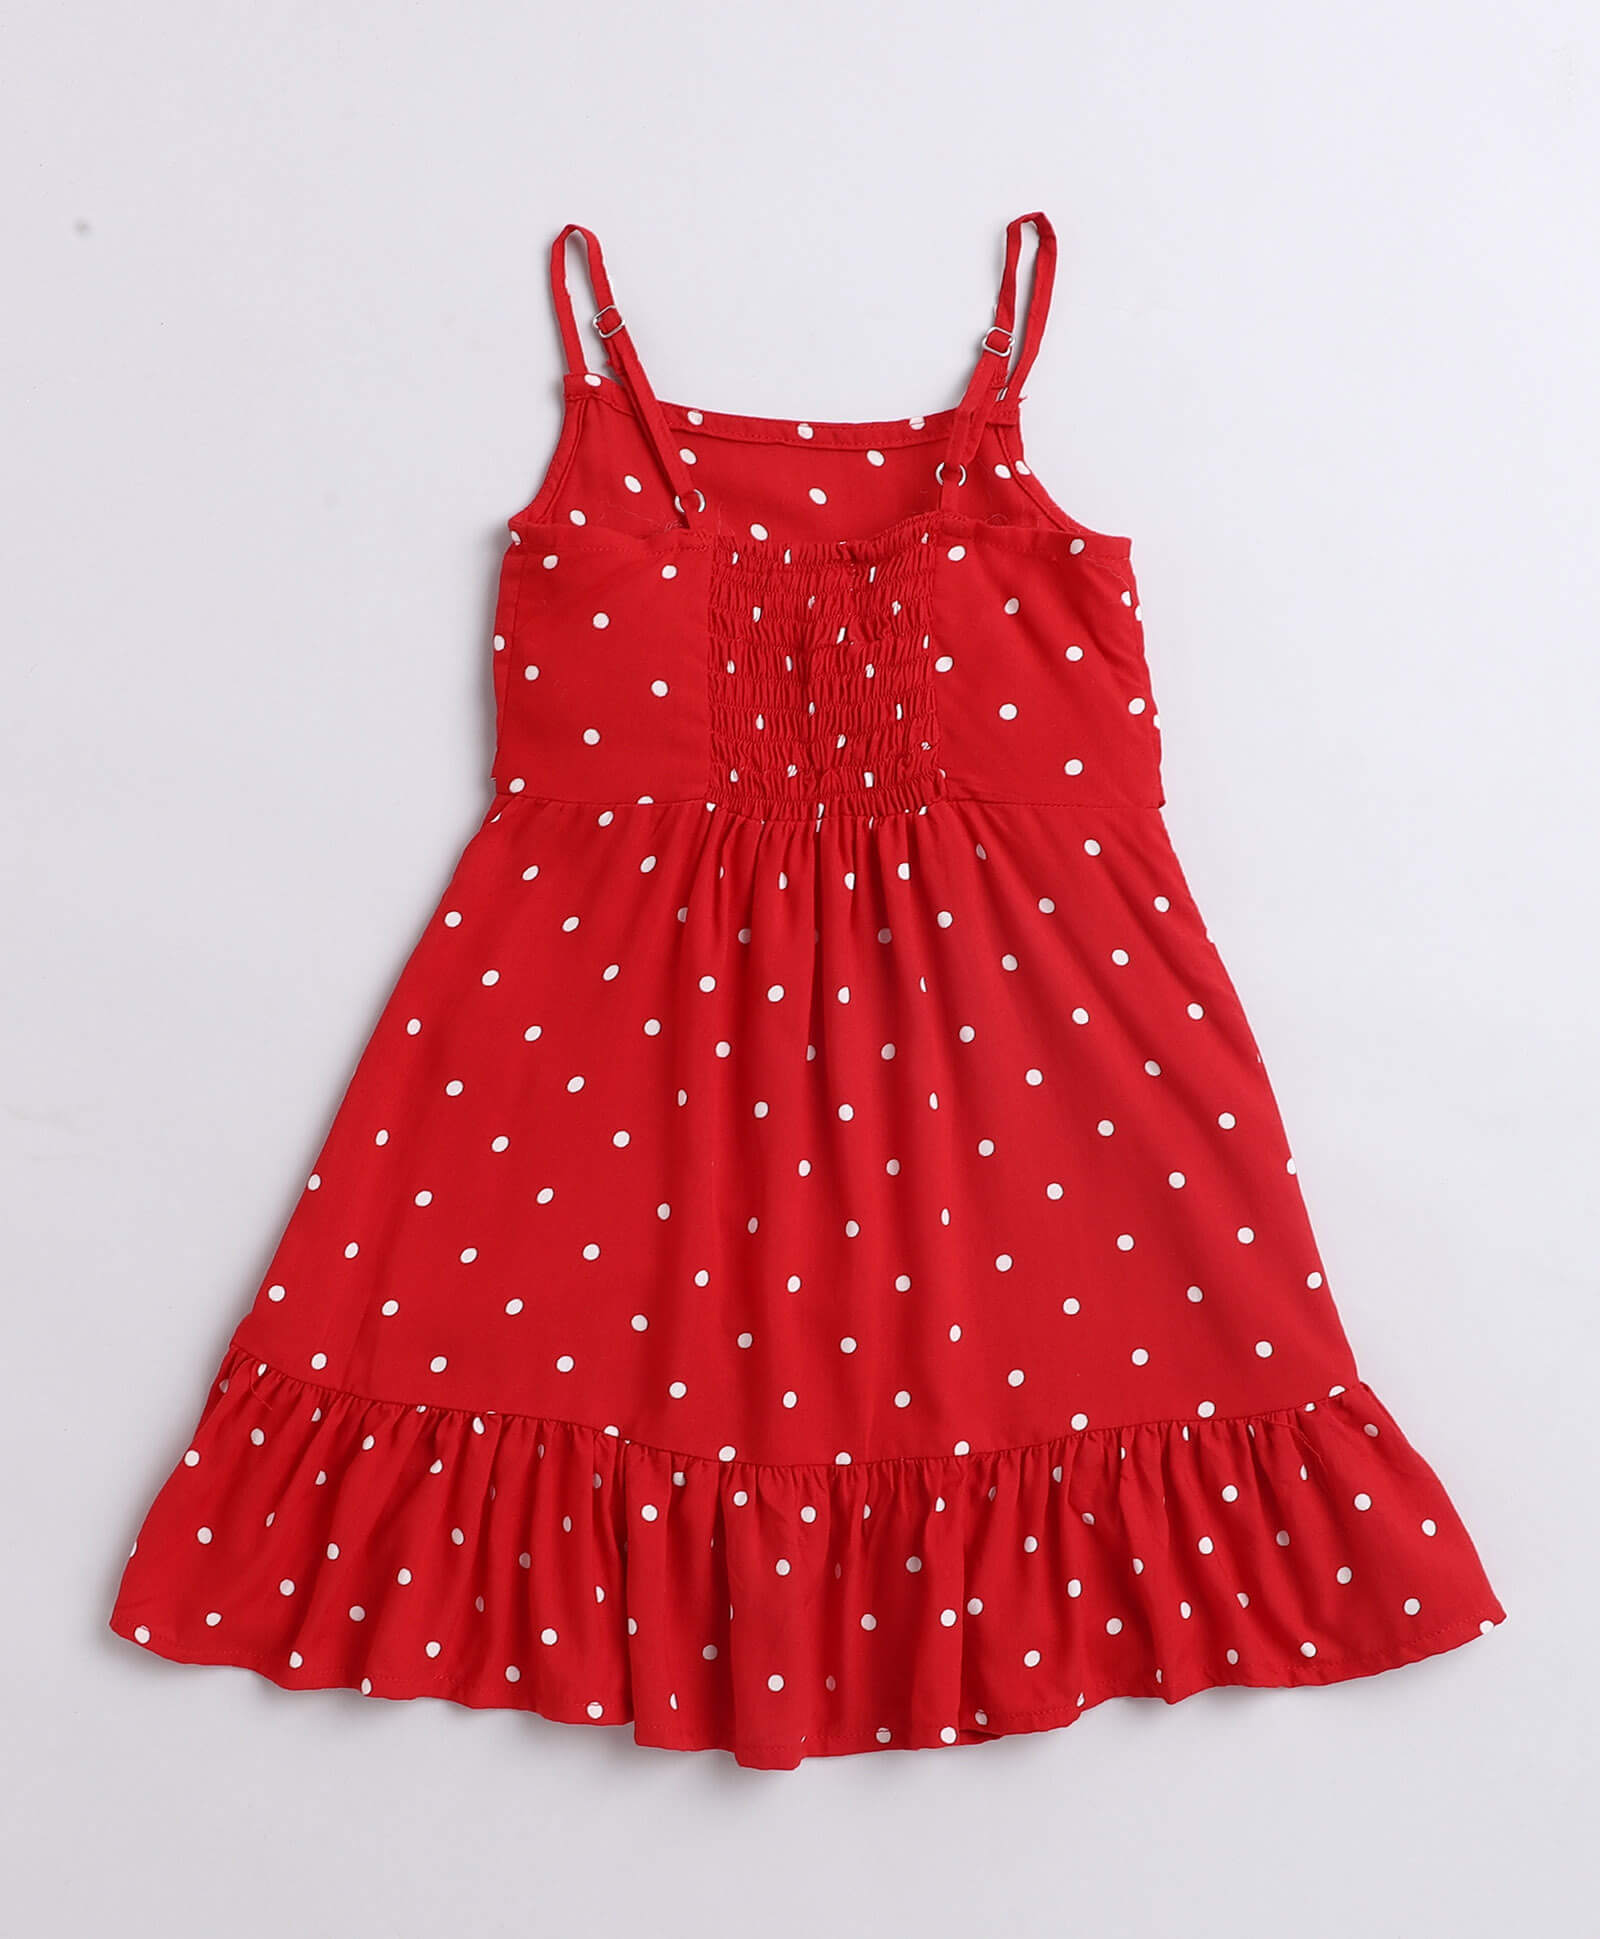 Taffykids red Sleeveless Front Tie Up Polka Dots Printed Dress - Red